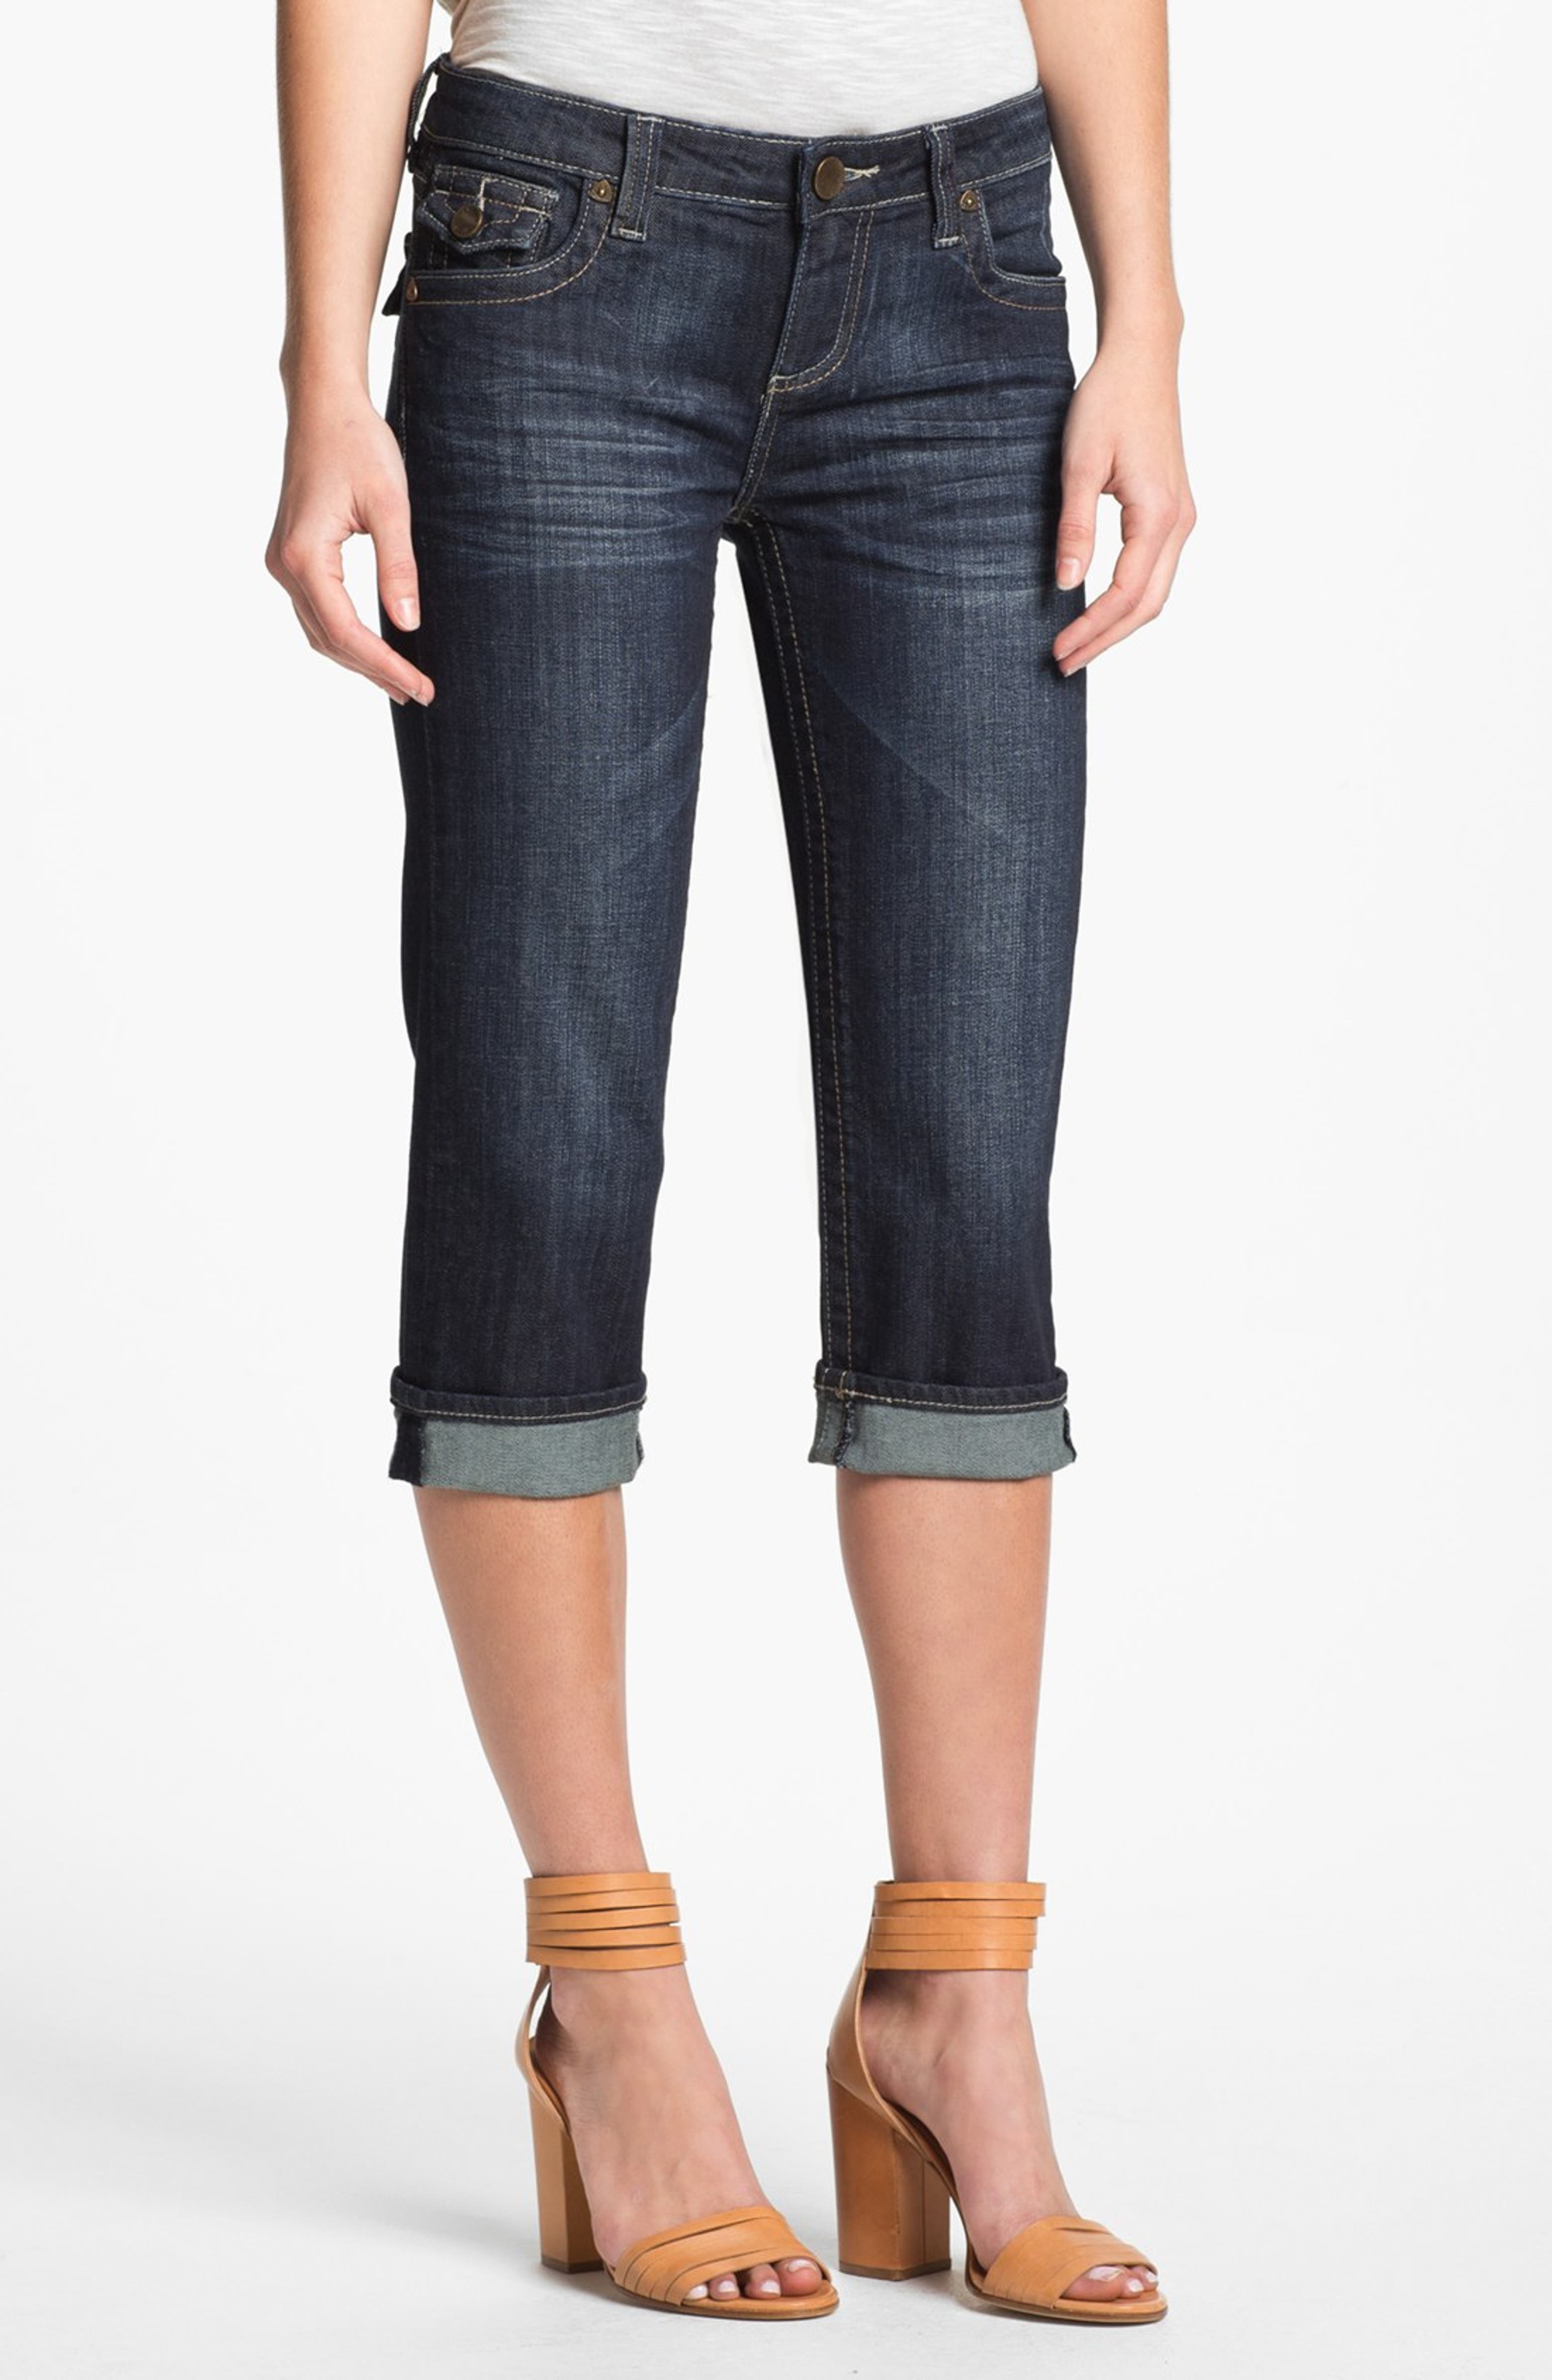 KUT from the Kloth 'Natalie' Crop Jeans | Nordstrom